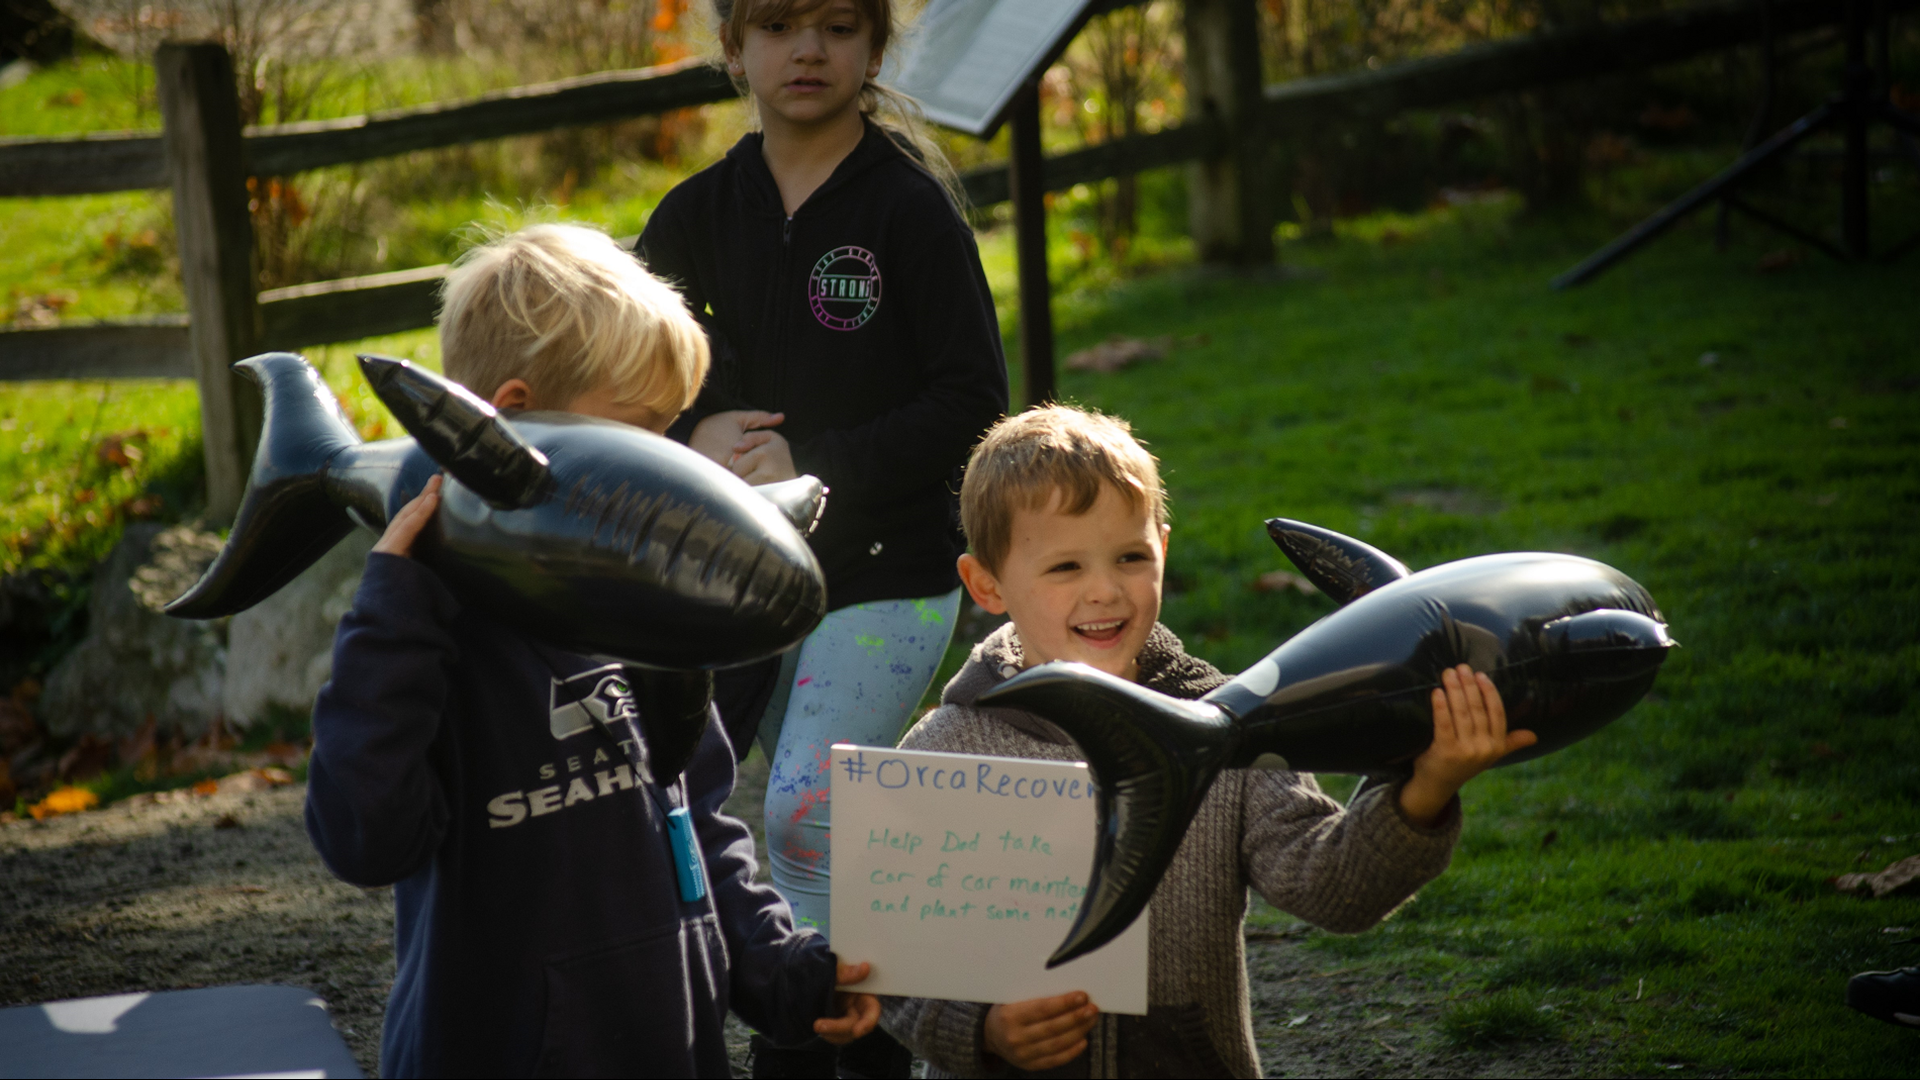 Orca Recovery Day 2019 consists of over 70 events across the region where people can work on projects to help our orca population survive.